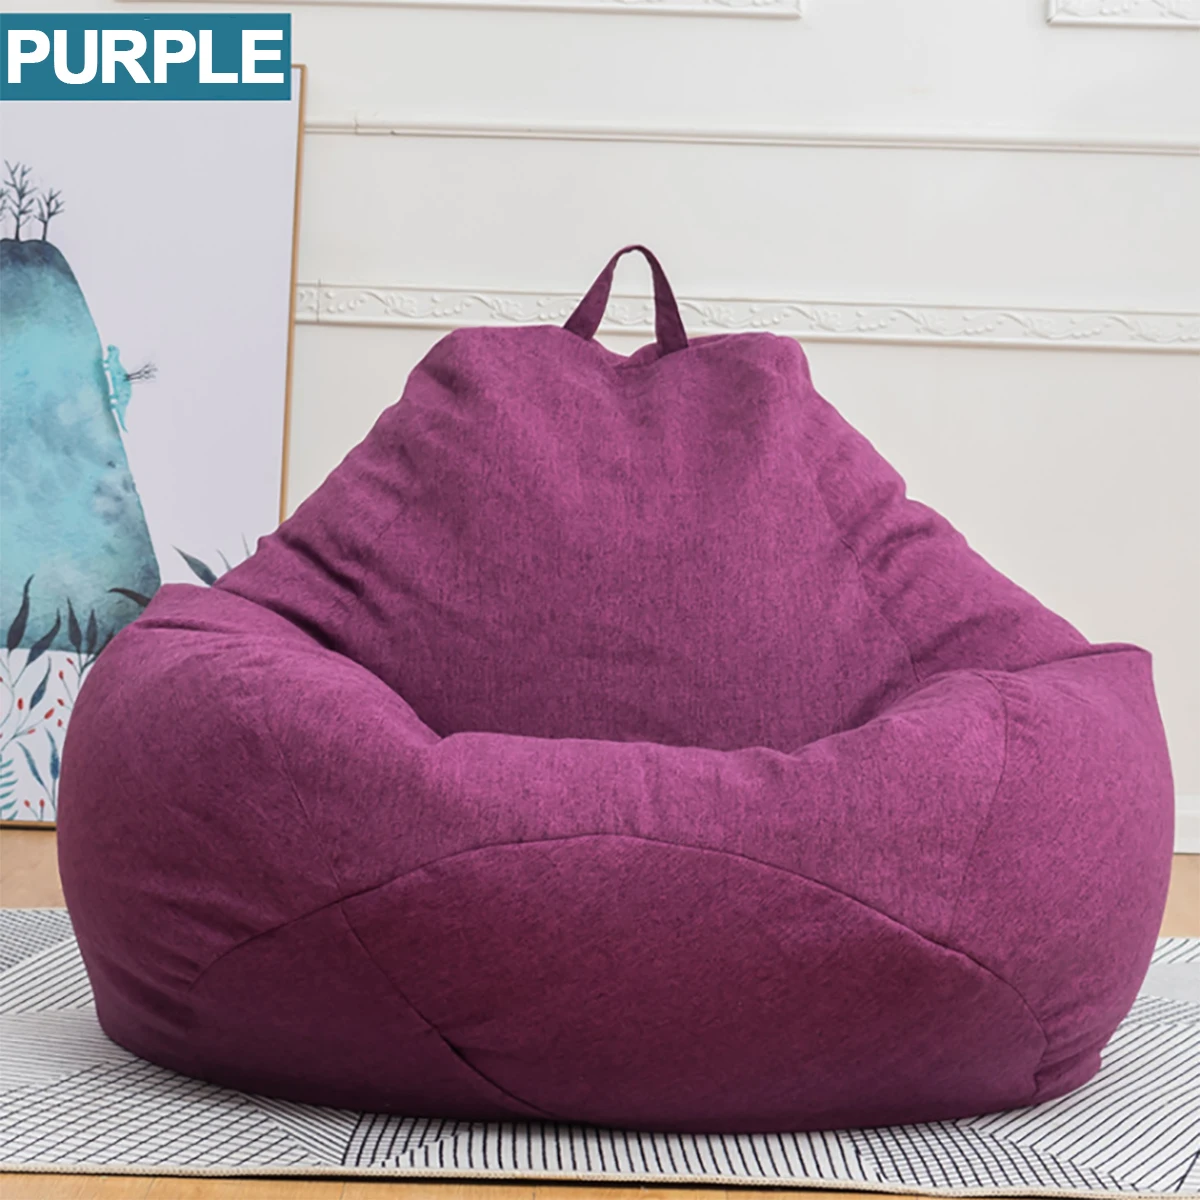 

100x120cm Lazy BeanBag Sofas Cover Chairs Without Filler Linen Cloth Lounger Seat Bean Bag Pouf Puff Couch Tatami Living Room